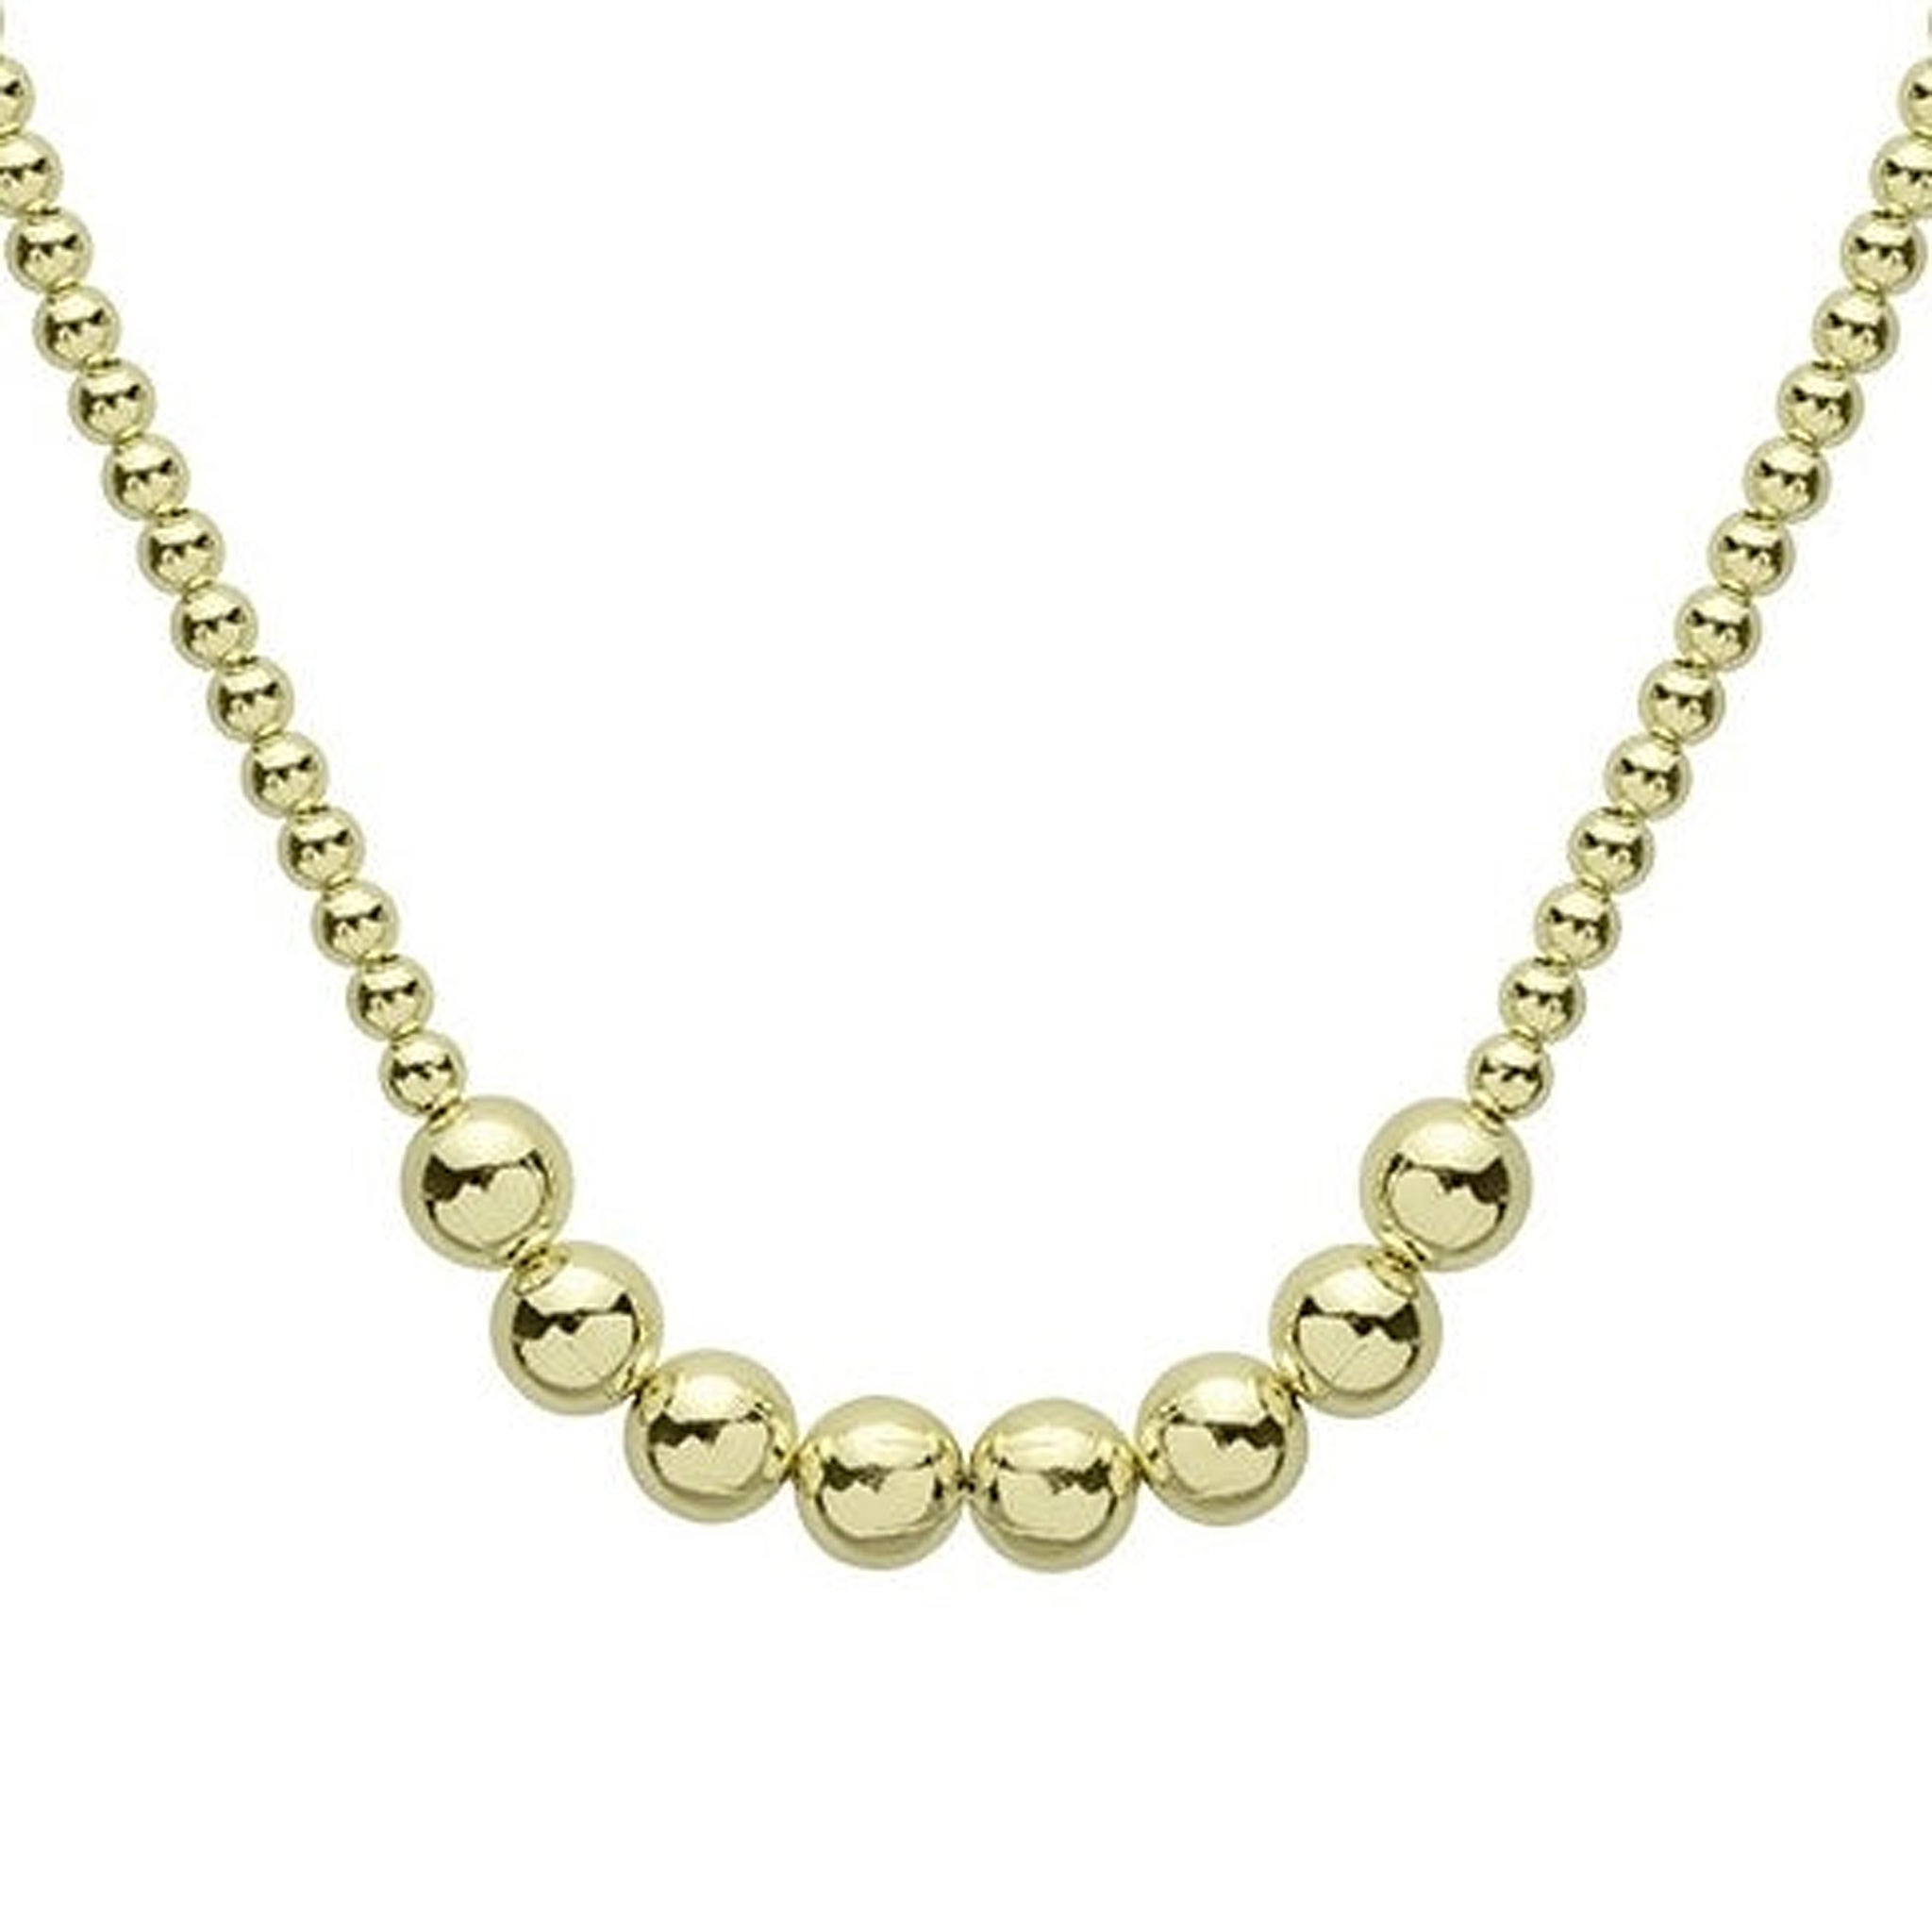 Sheila Fajl Merry Go Round Beaded Necklace in 18k Polished Gold Plated